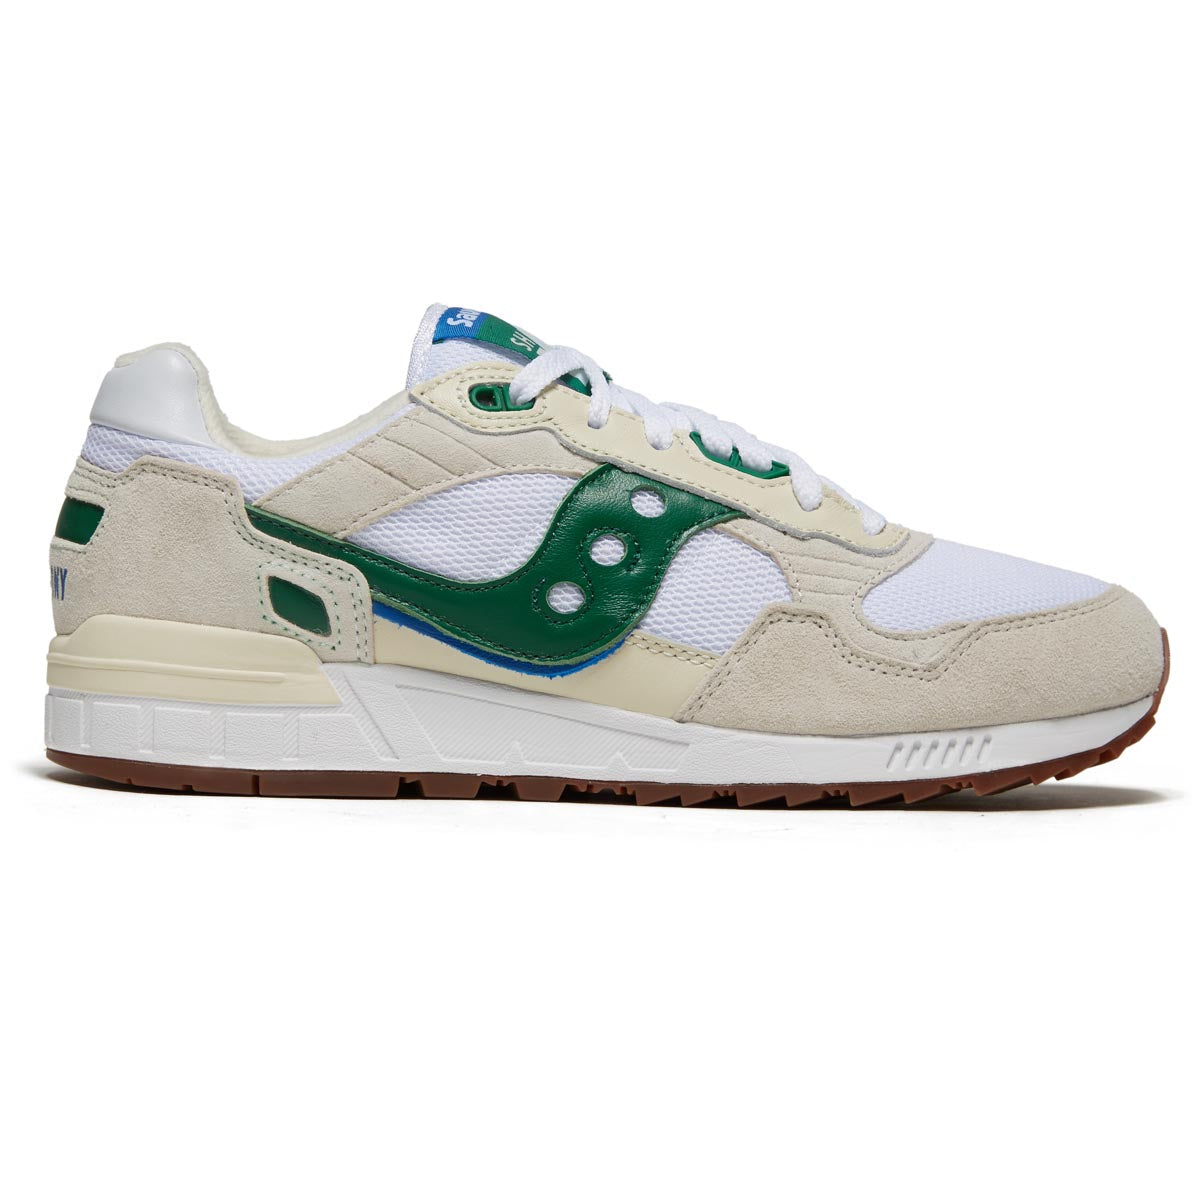 Saucony Shadow 5000 Shoes - White/Green image 1